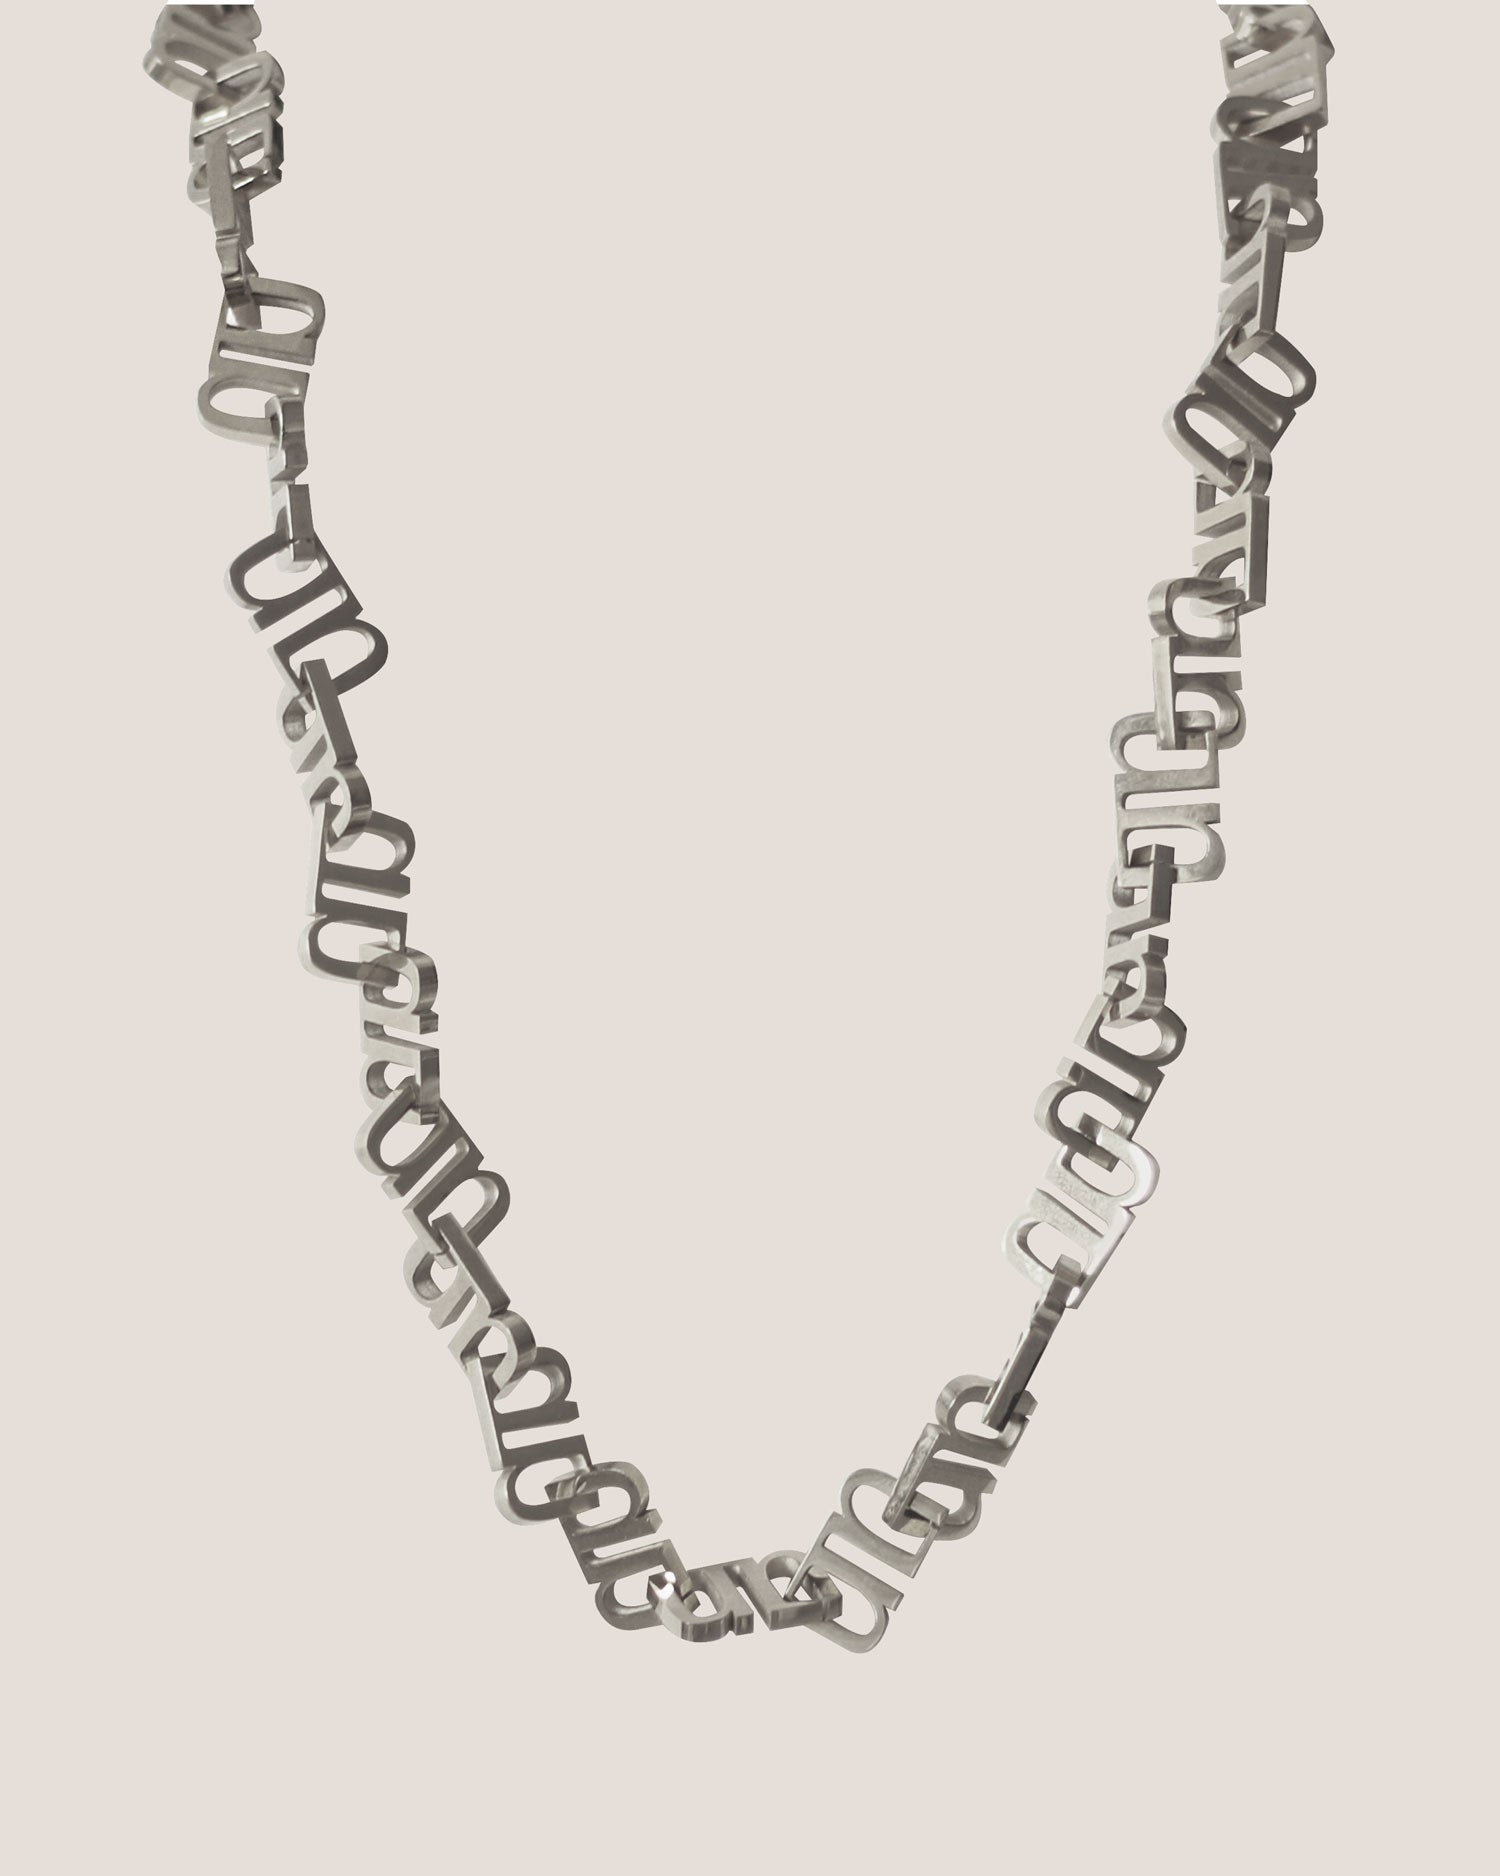 Gung Iconic Silver Chain Necklace